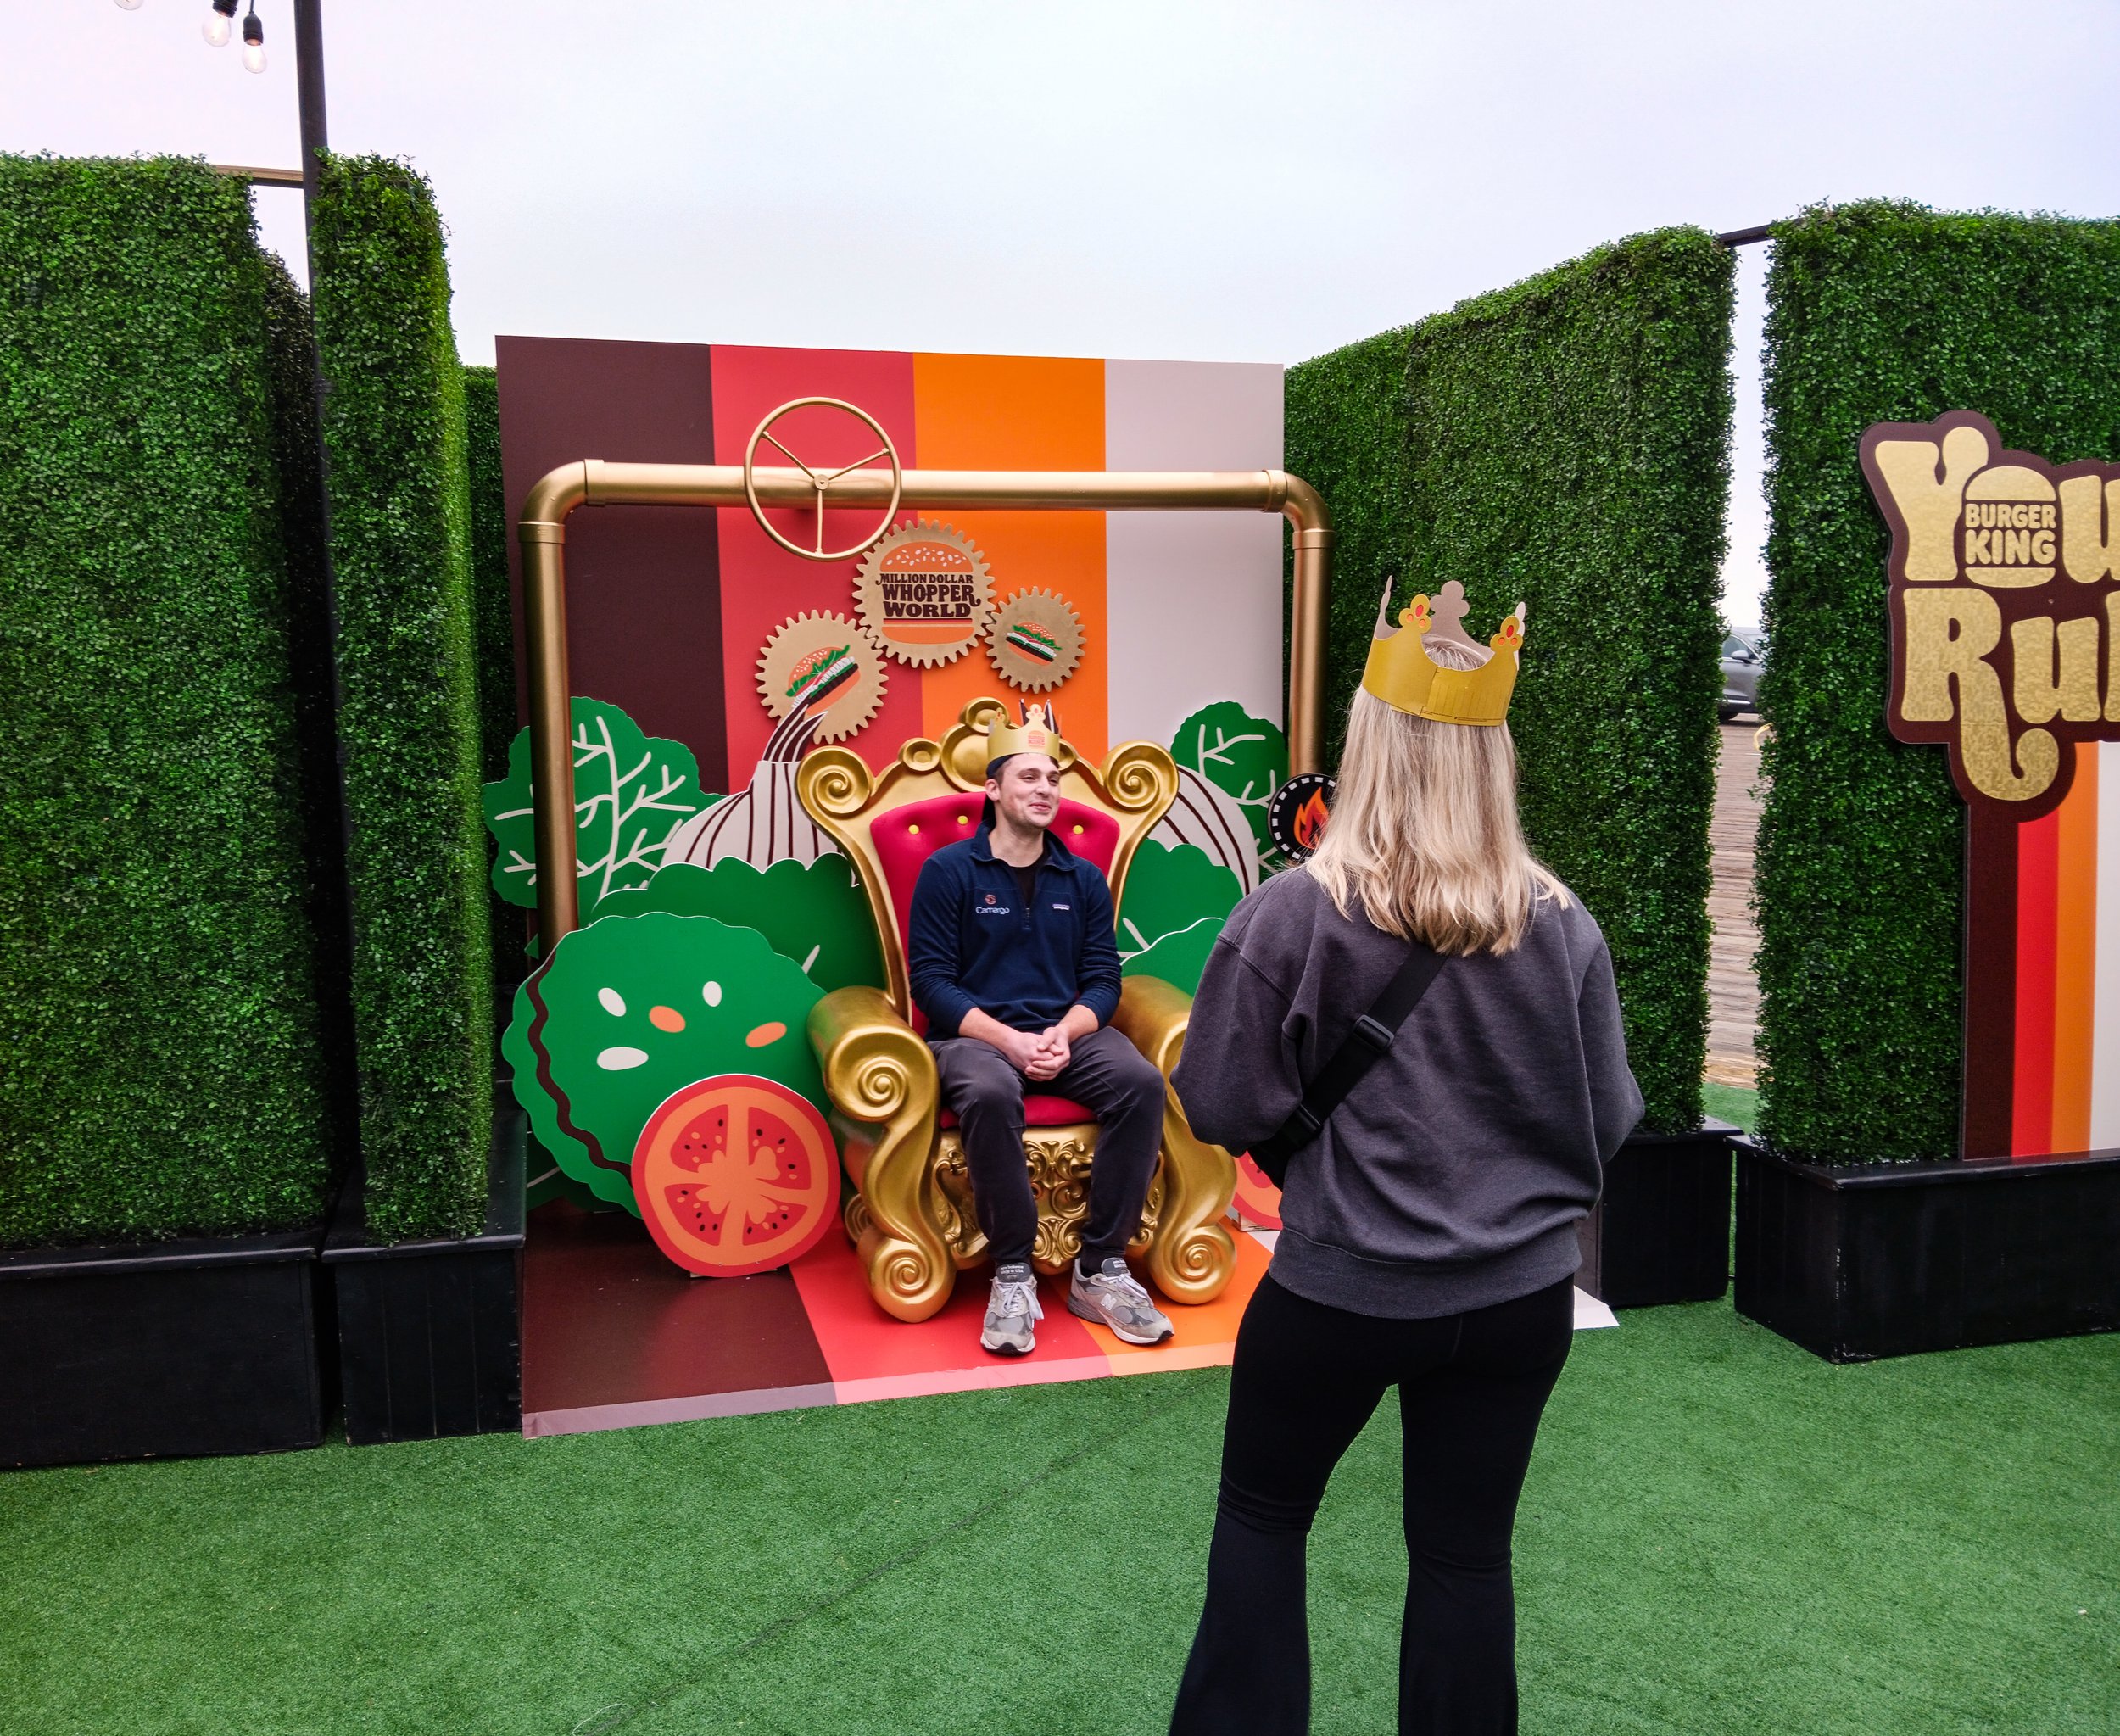 Photos: Burger King's Million Dollar Whopper World pop-up event in